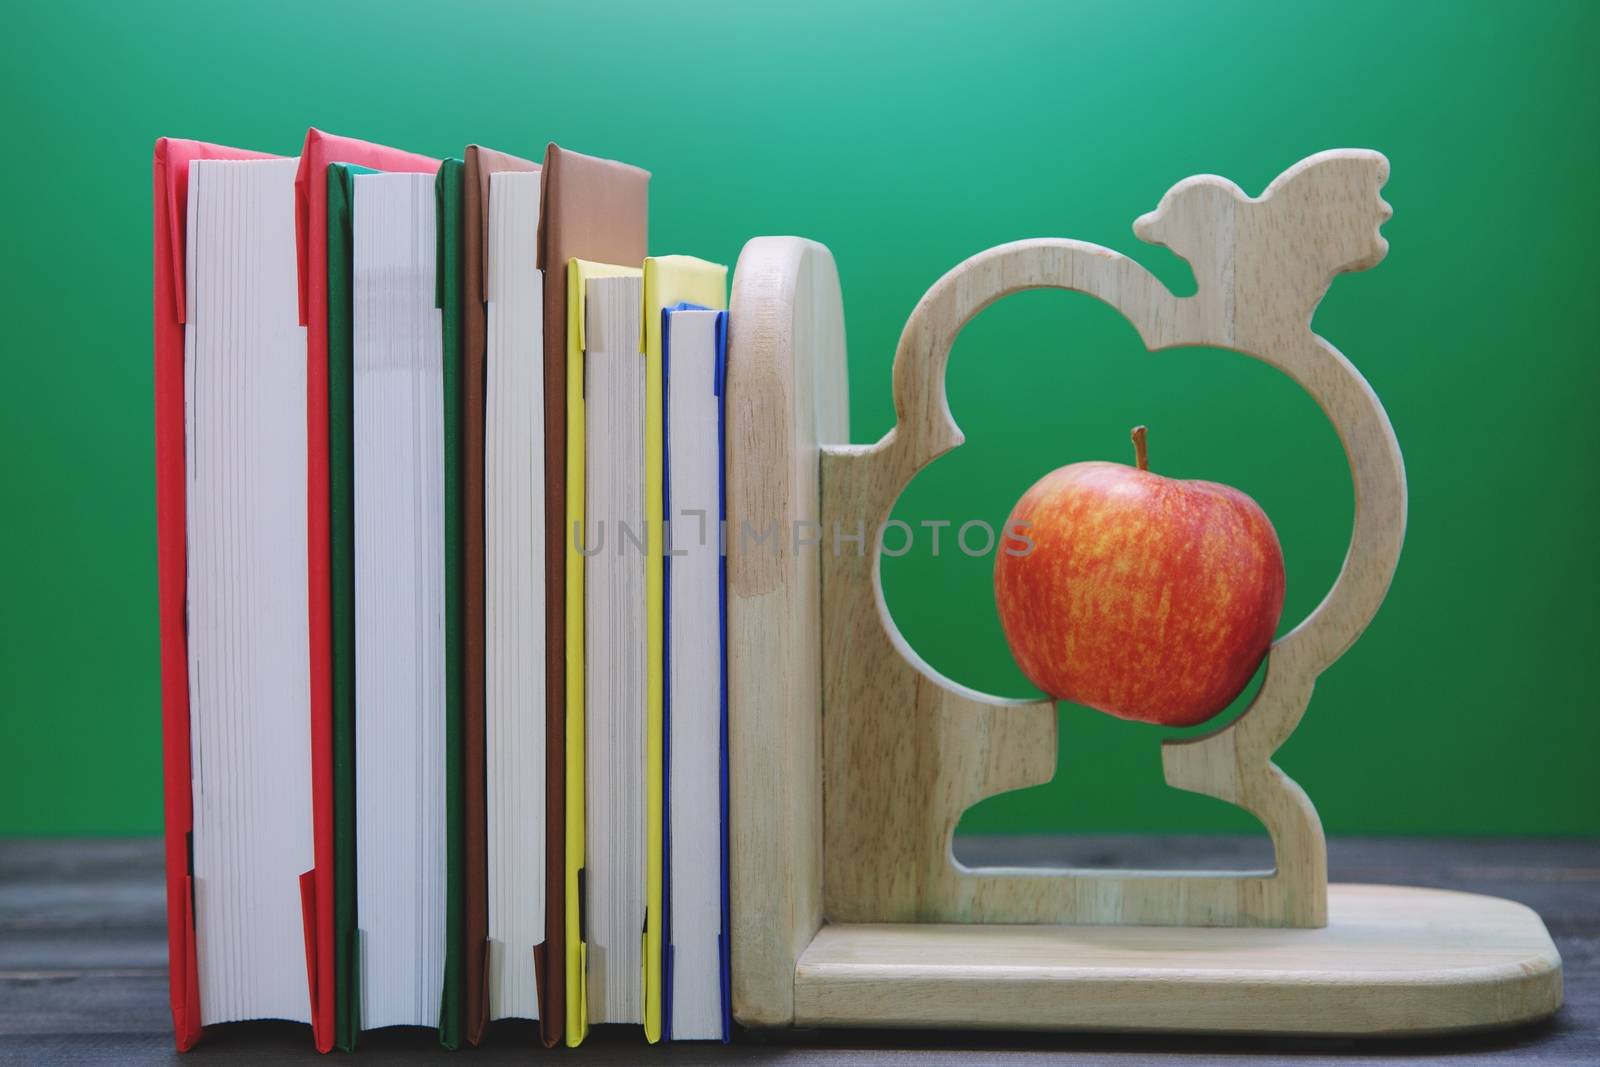 School books many on desk. and Equipment along with bookmark and apple.